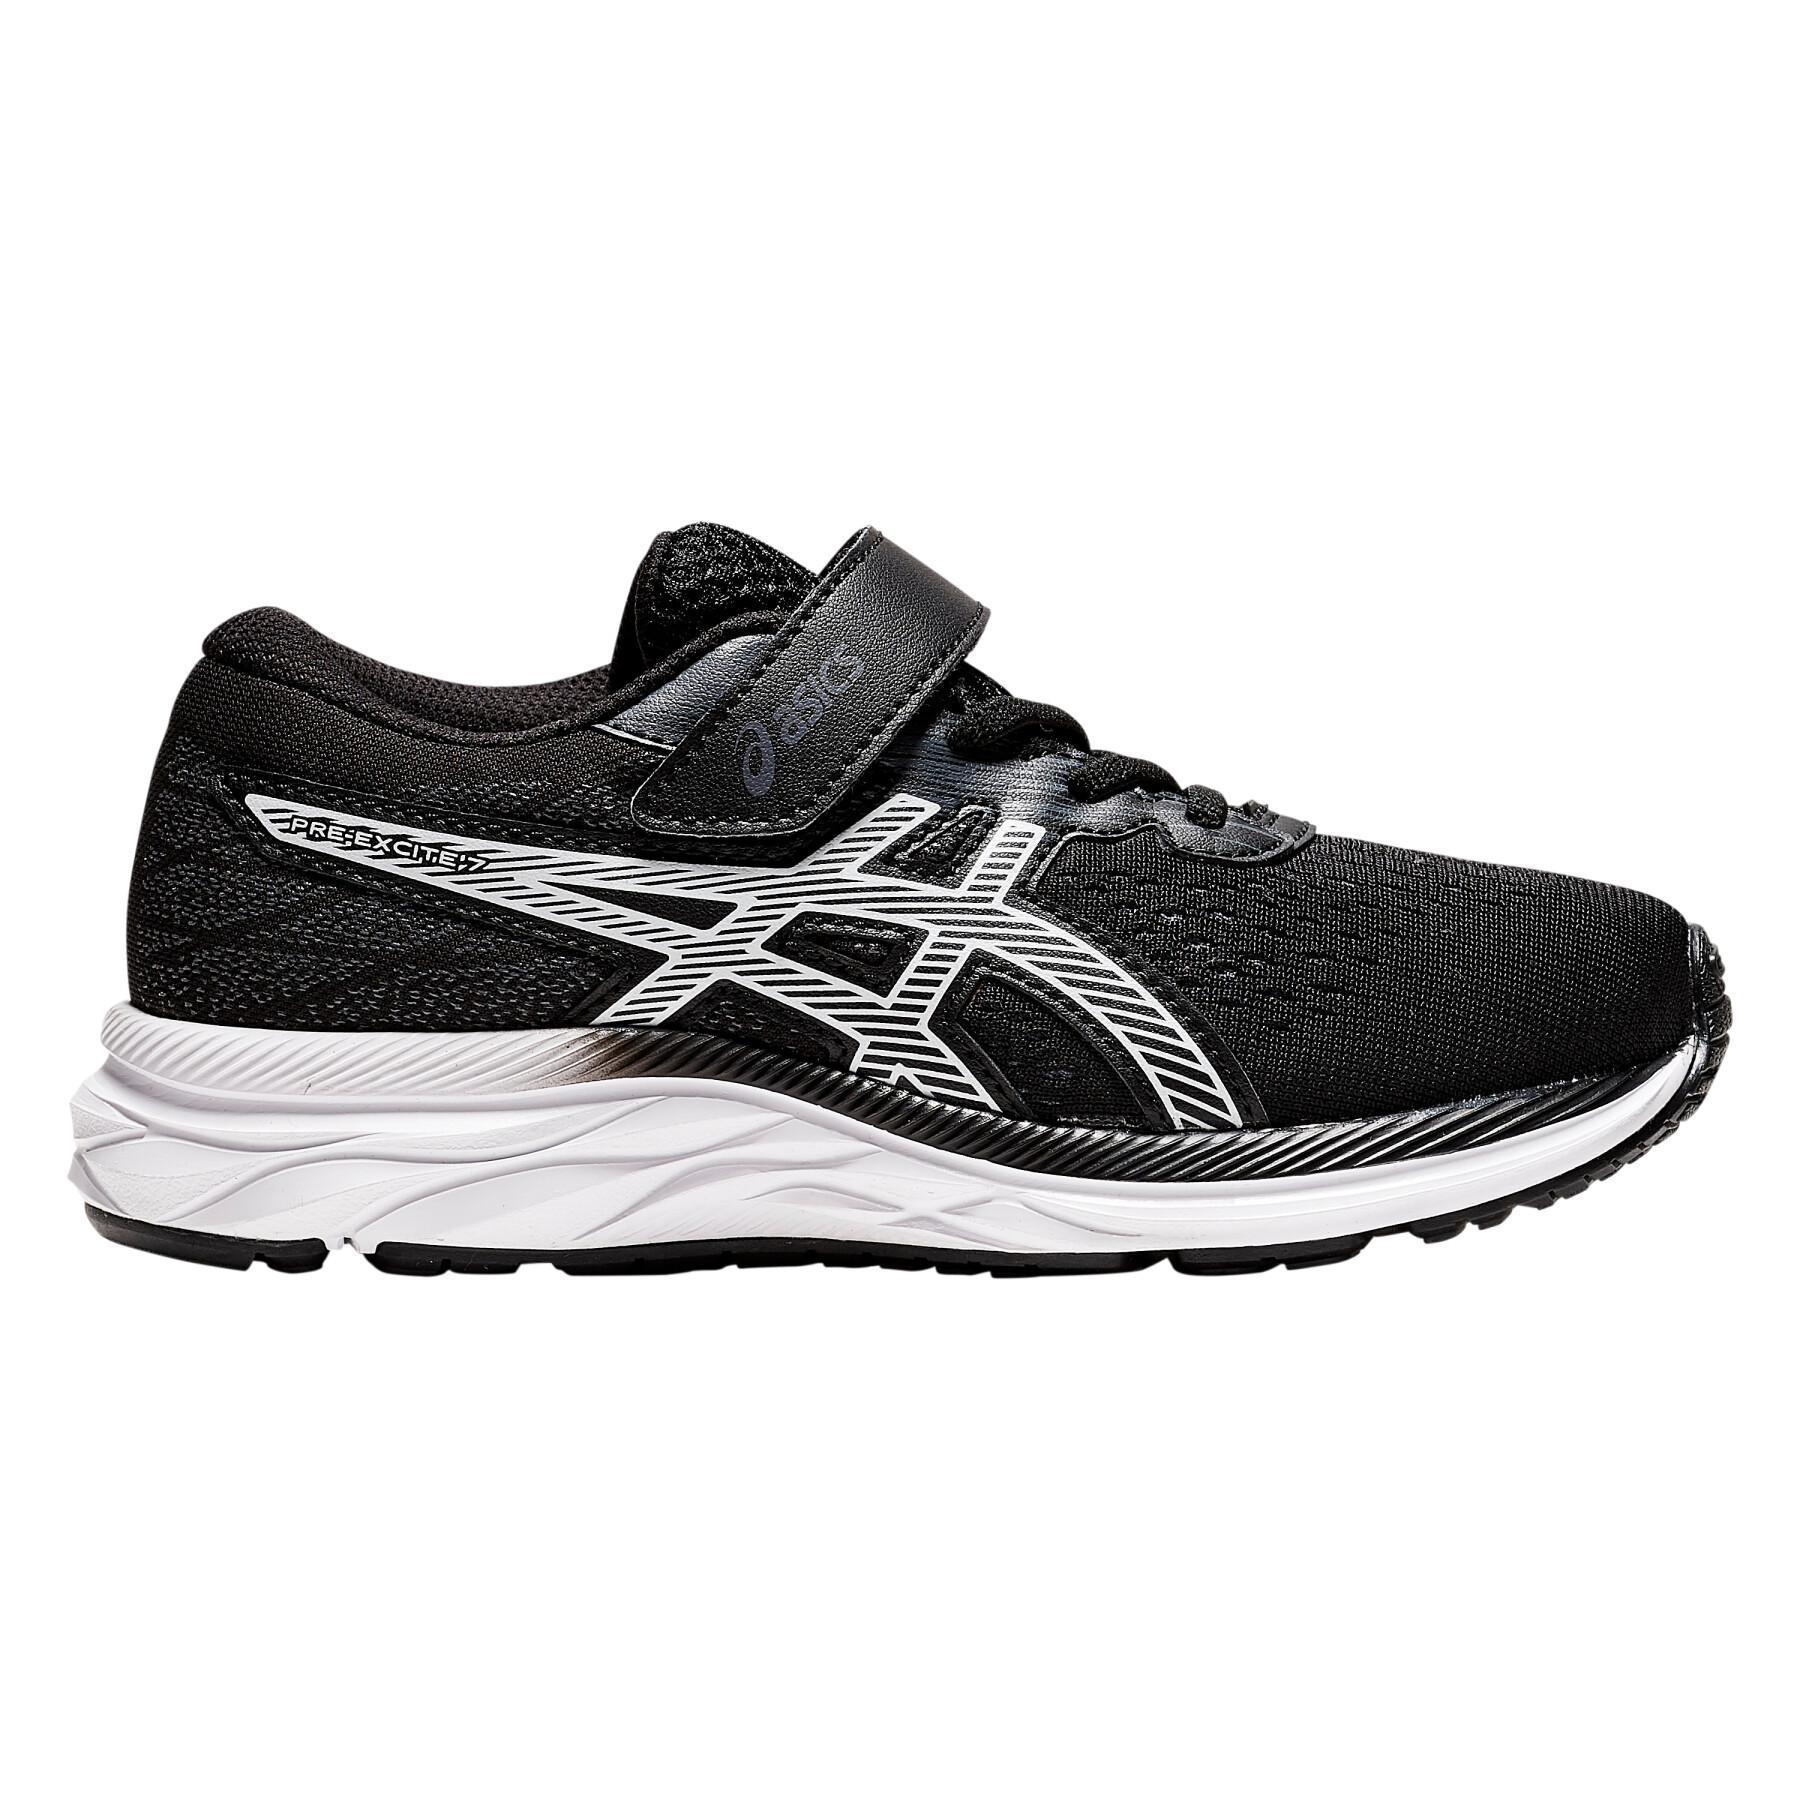 Kid shoes Asics Pre excite 7